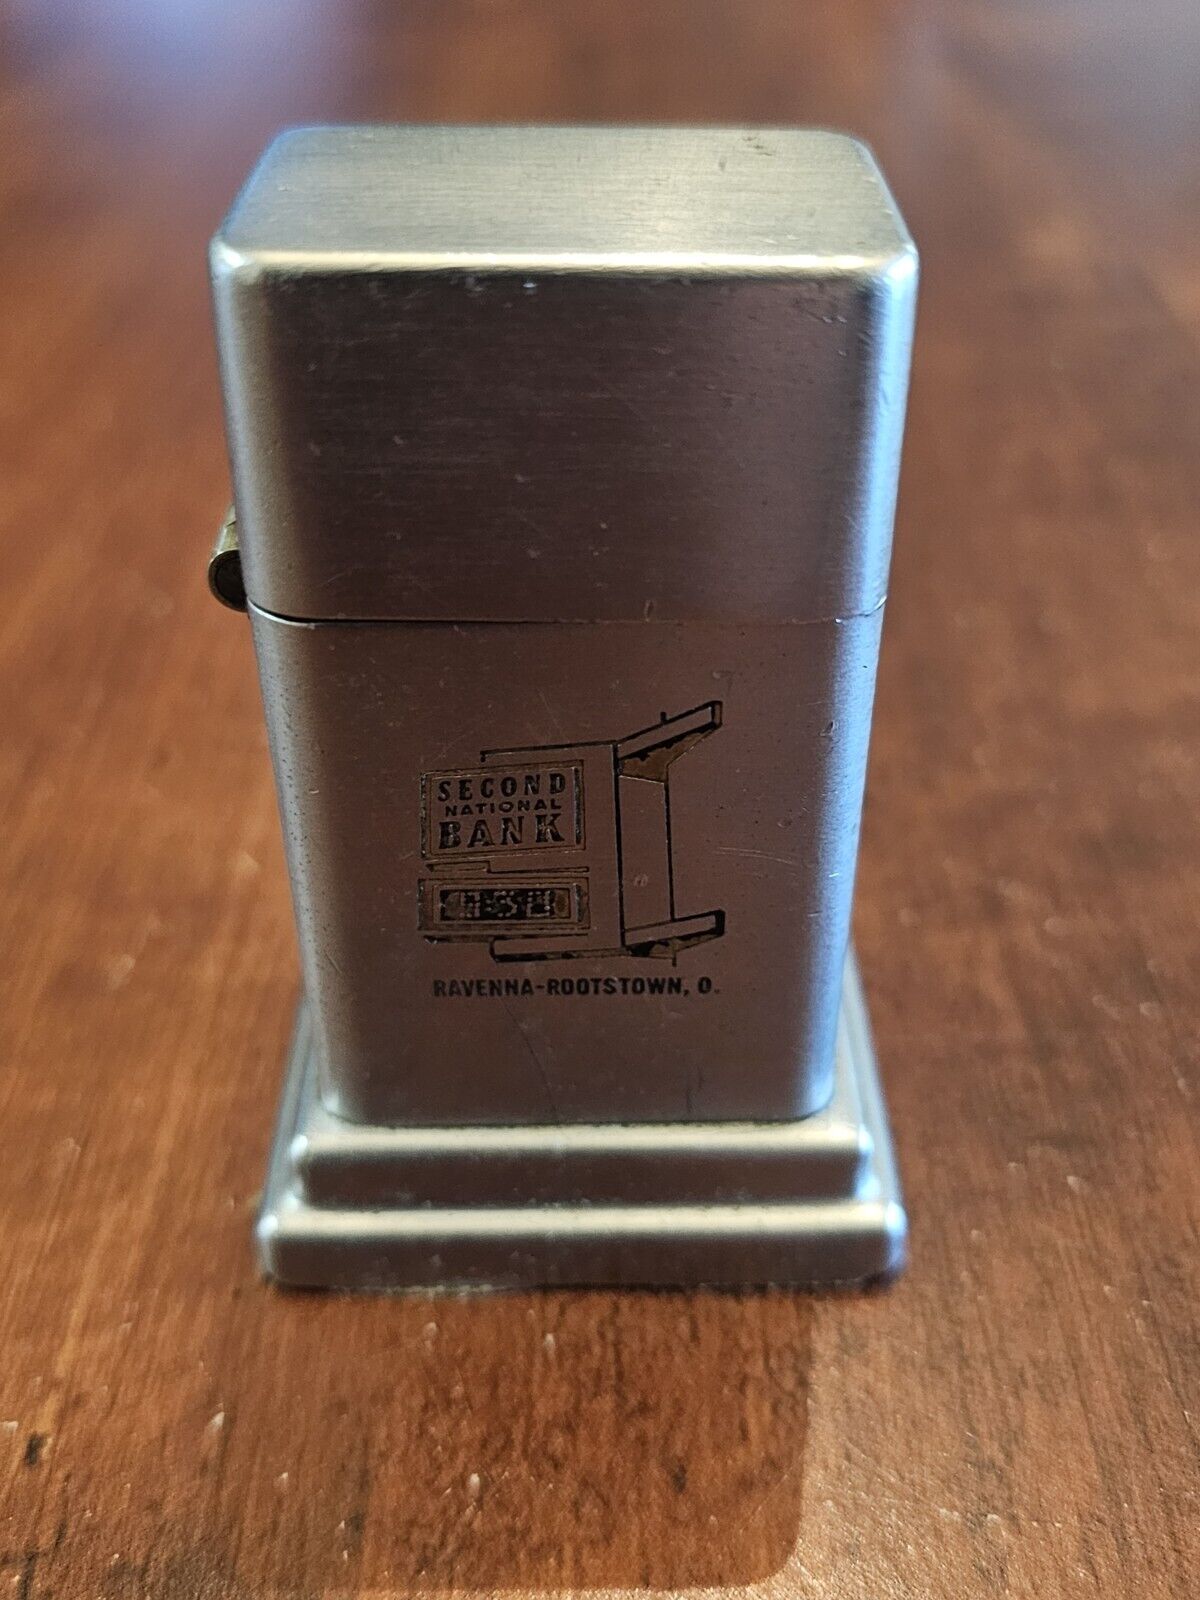 Vintage Zippo Table Lighter Barcroft Second National Bank Ohio Advertizing